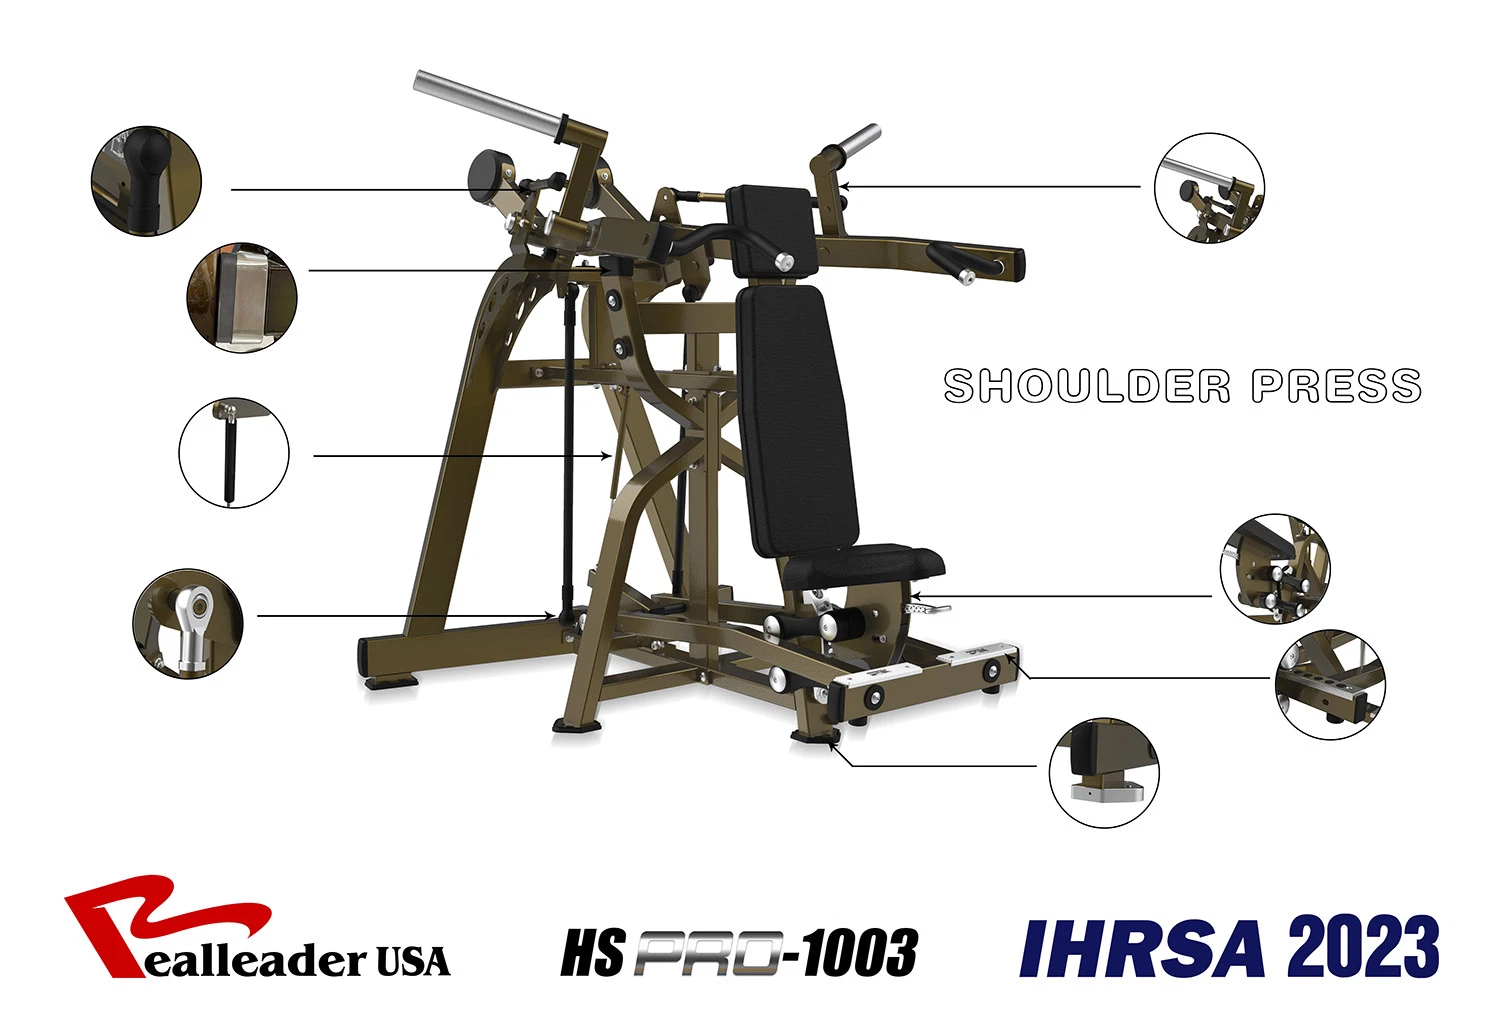 Hot Sale Realleader Fitness Home Commercial Exercise Equipment Gym Equipments Ld-1003